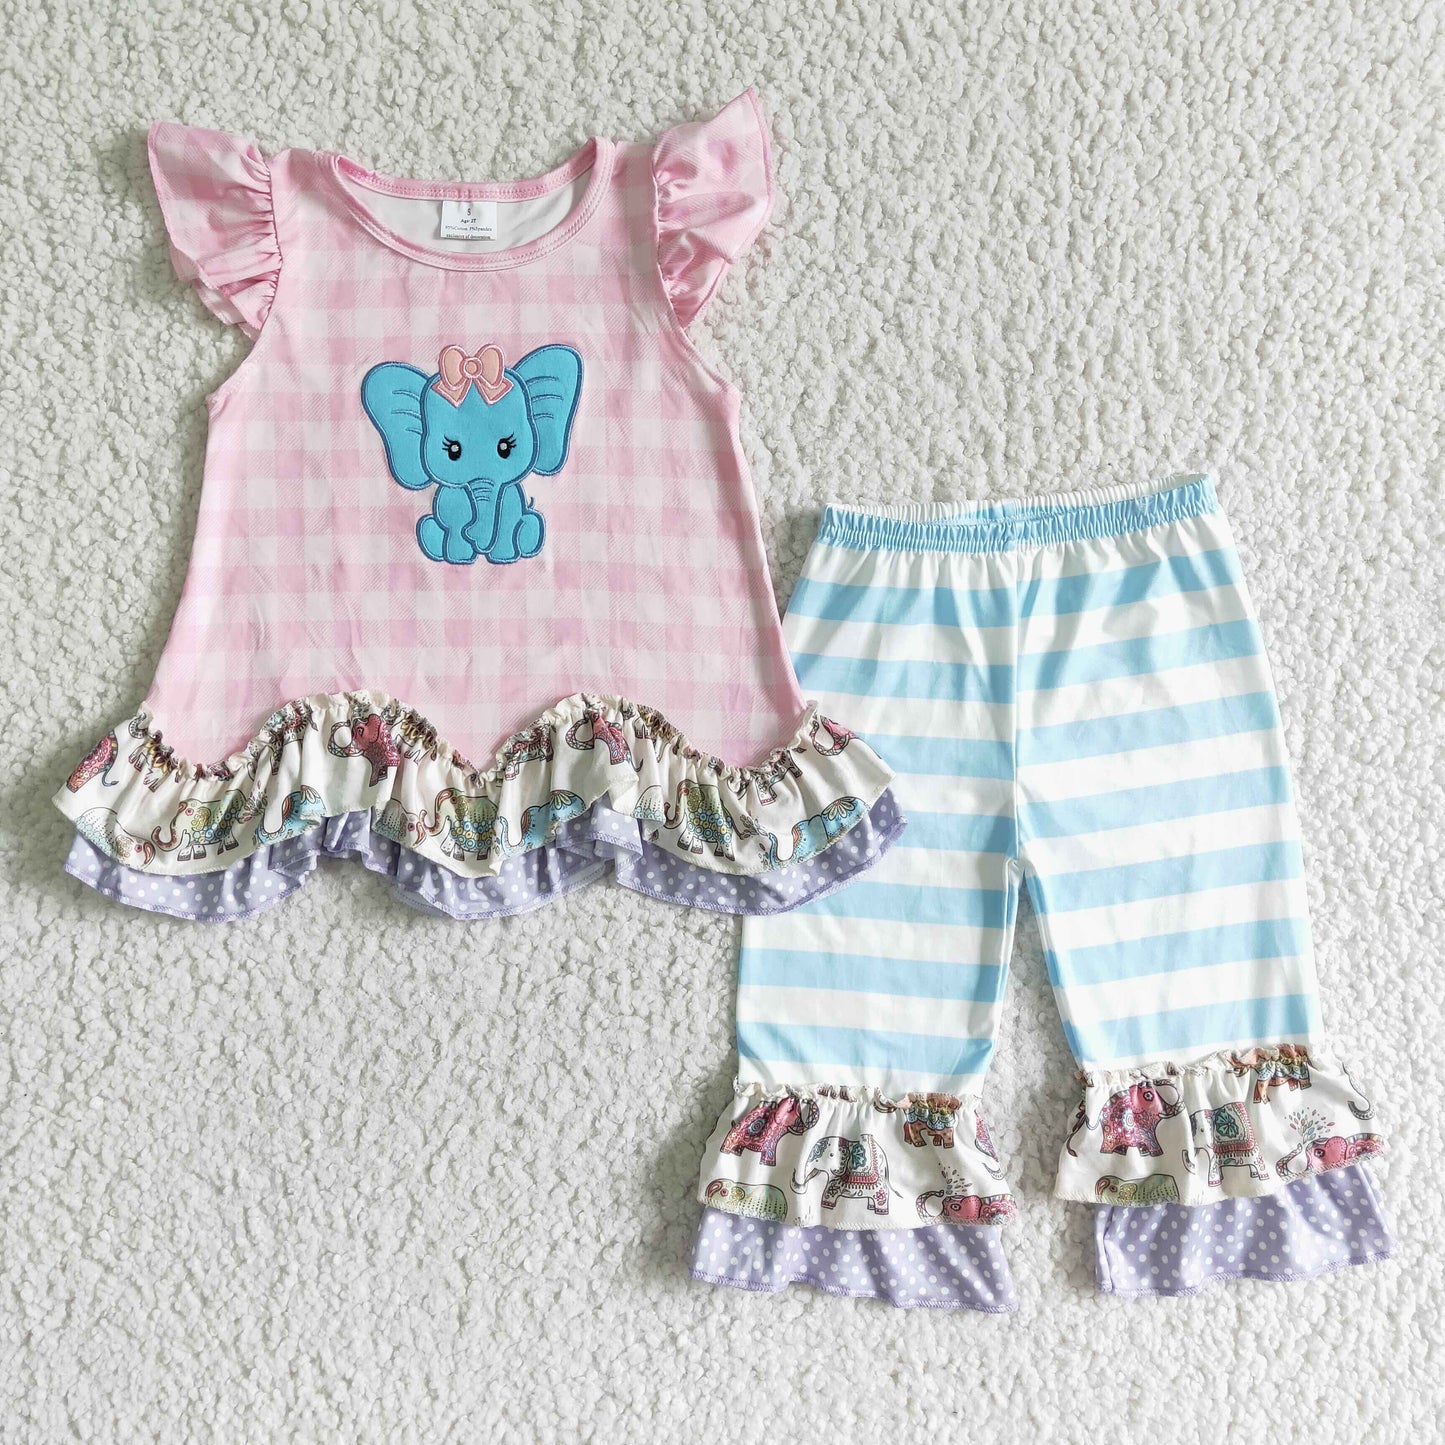 Elephant embroidery tunic capris girls clothes